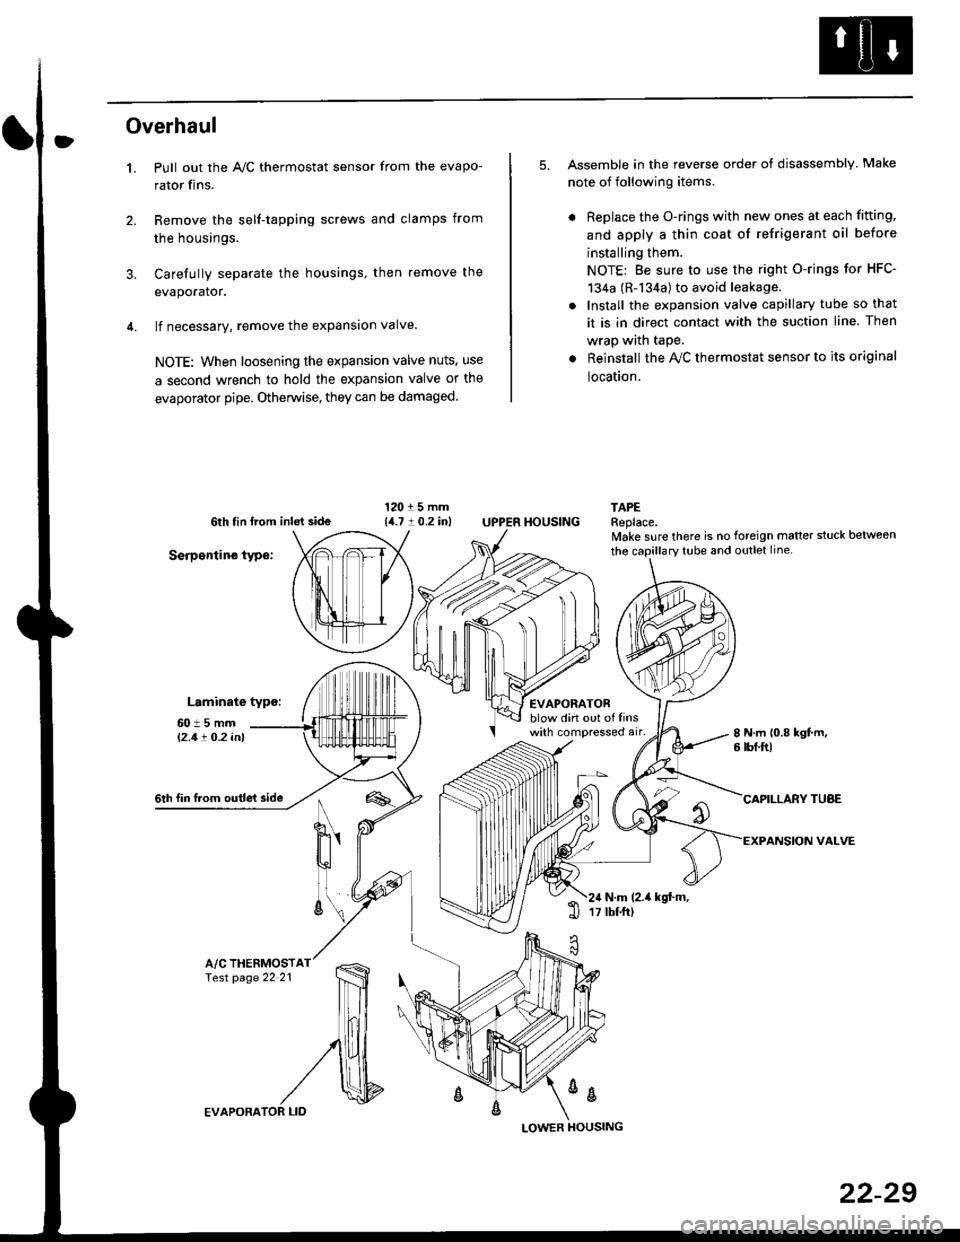 HONDA CIVIC 1996 6.G Workshop Manual Overhaul
1.
3.
Pull out the A,/C thermostat sensor from the evapo-
rator fins.
Remove the self-tapping screws and clamps from
the housings.
Carefully separate the housings, then remove the
evaporator.